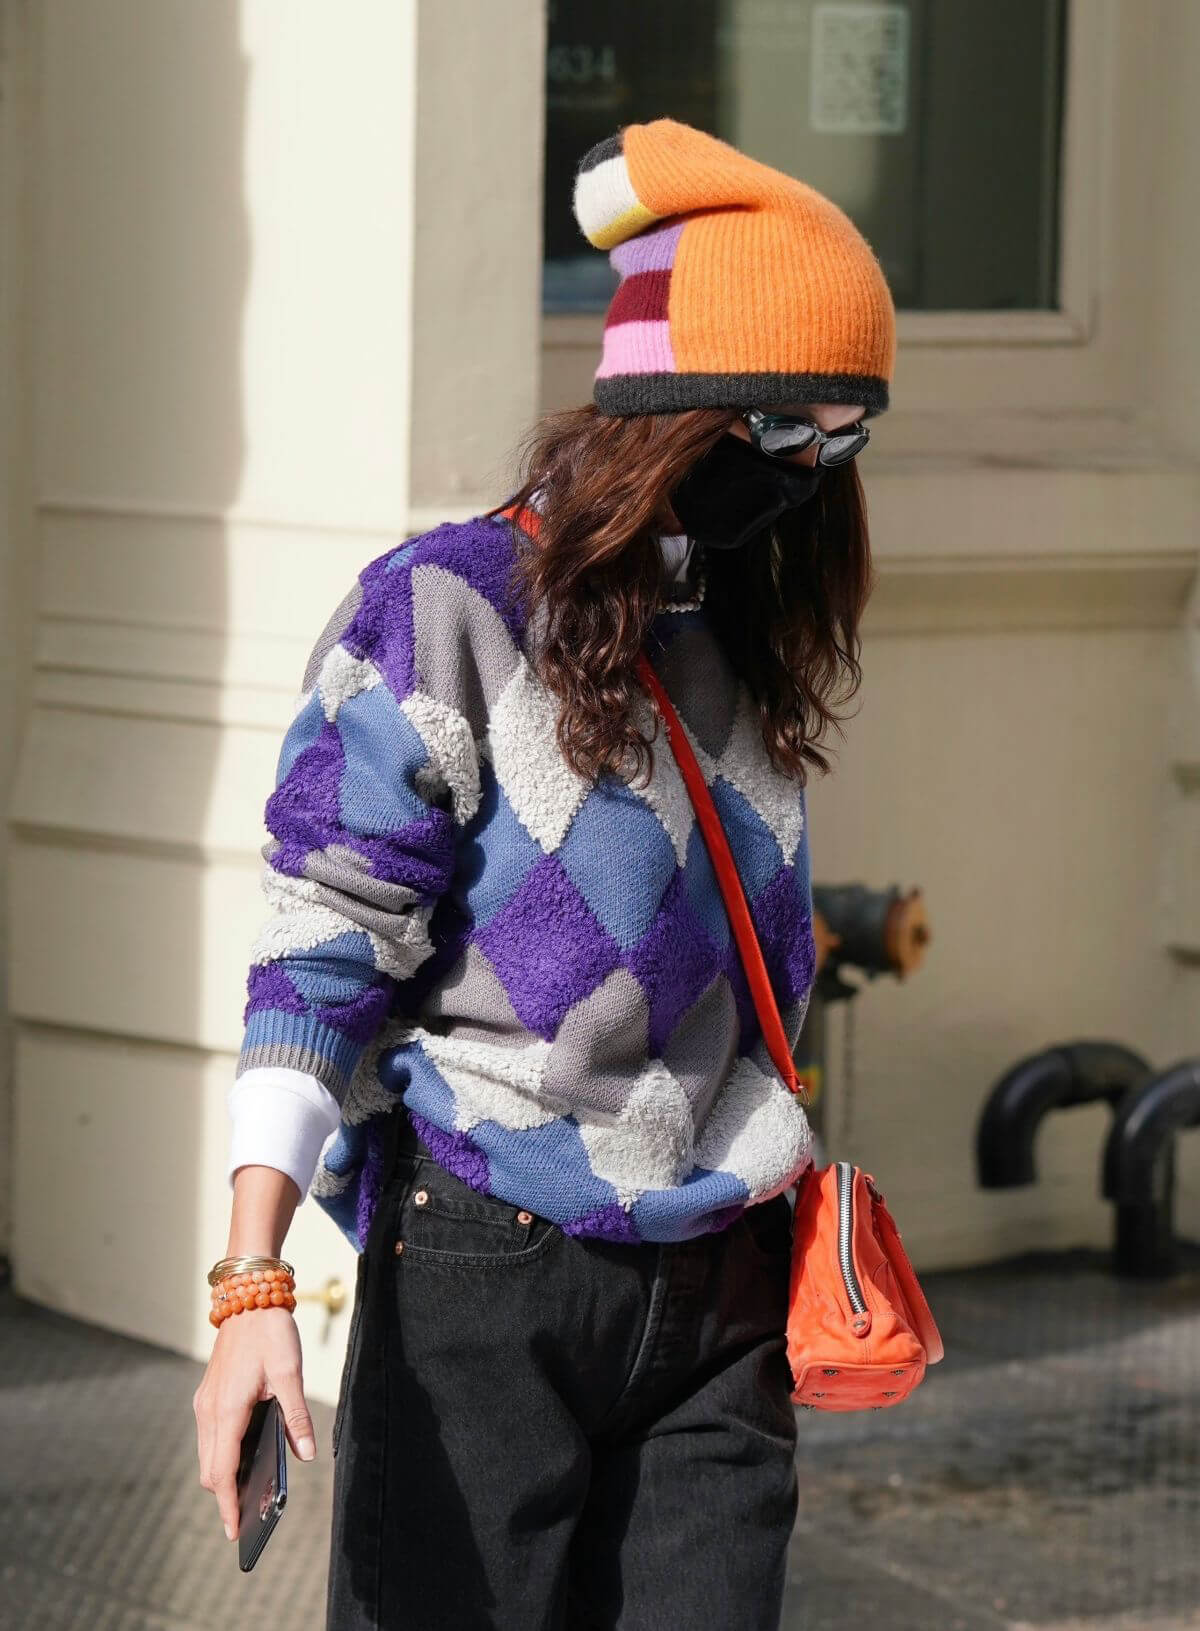 Bella Hadid Leaves Her Apartment in Orange Cap with Check Sweater 02/11/2021 2